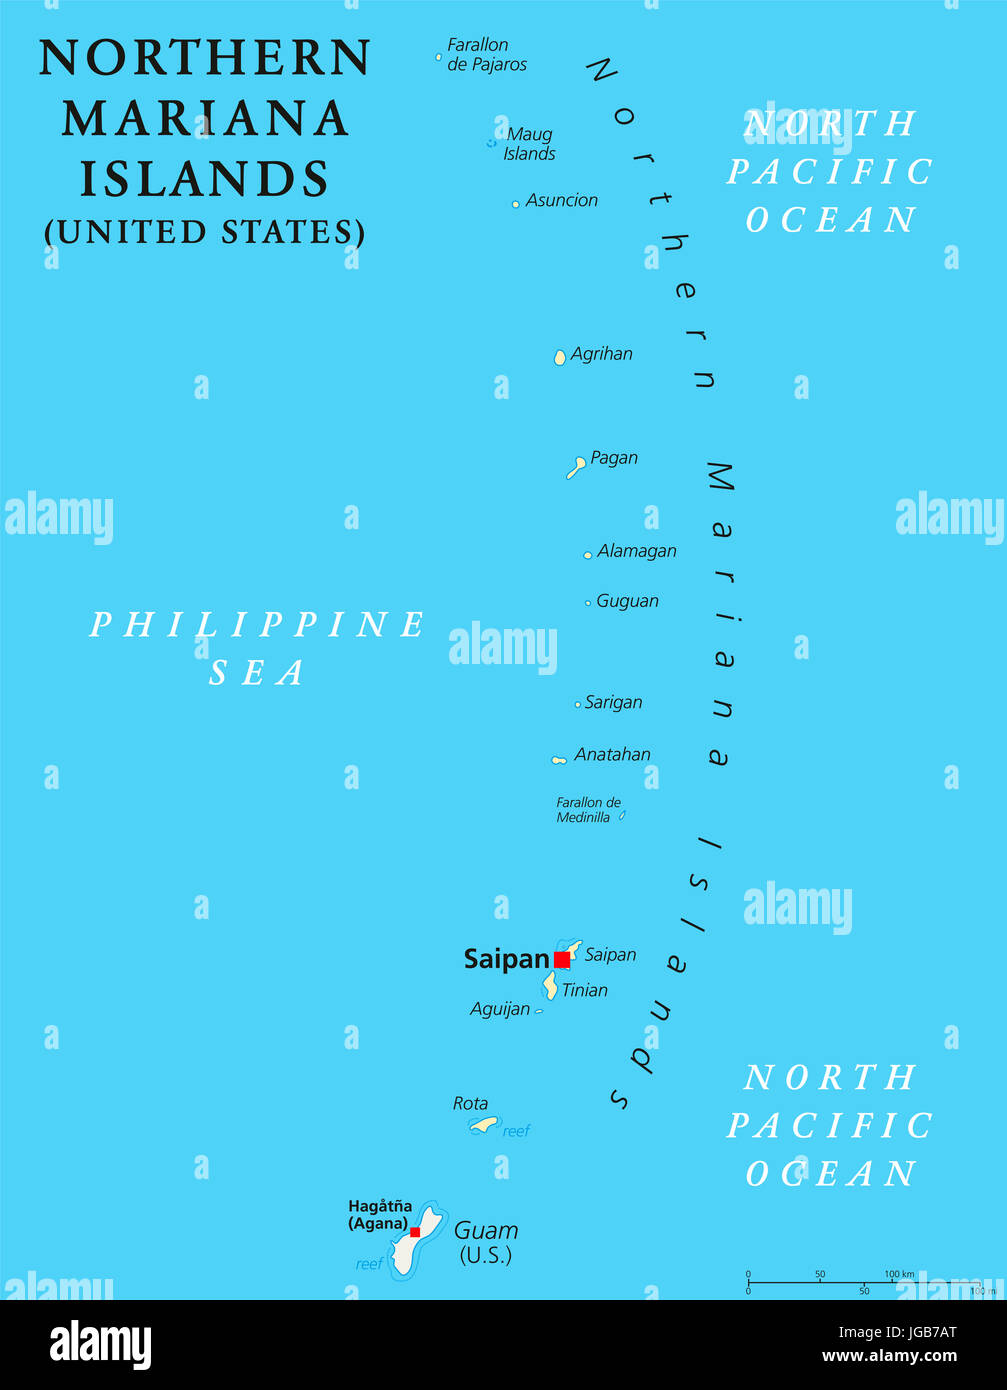 Northern Mariana Islands political map with capital Saipan. Insular area and commonwealth of United States in Pacific Ocean, north of Guam. Stock Photo